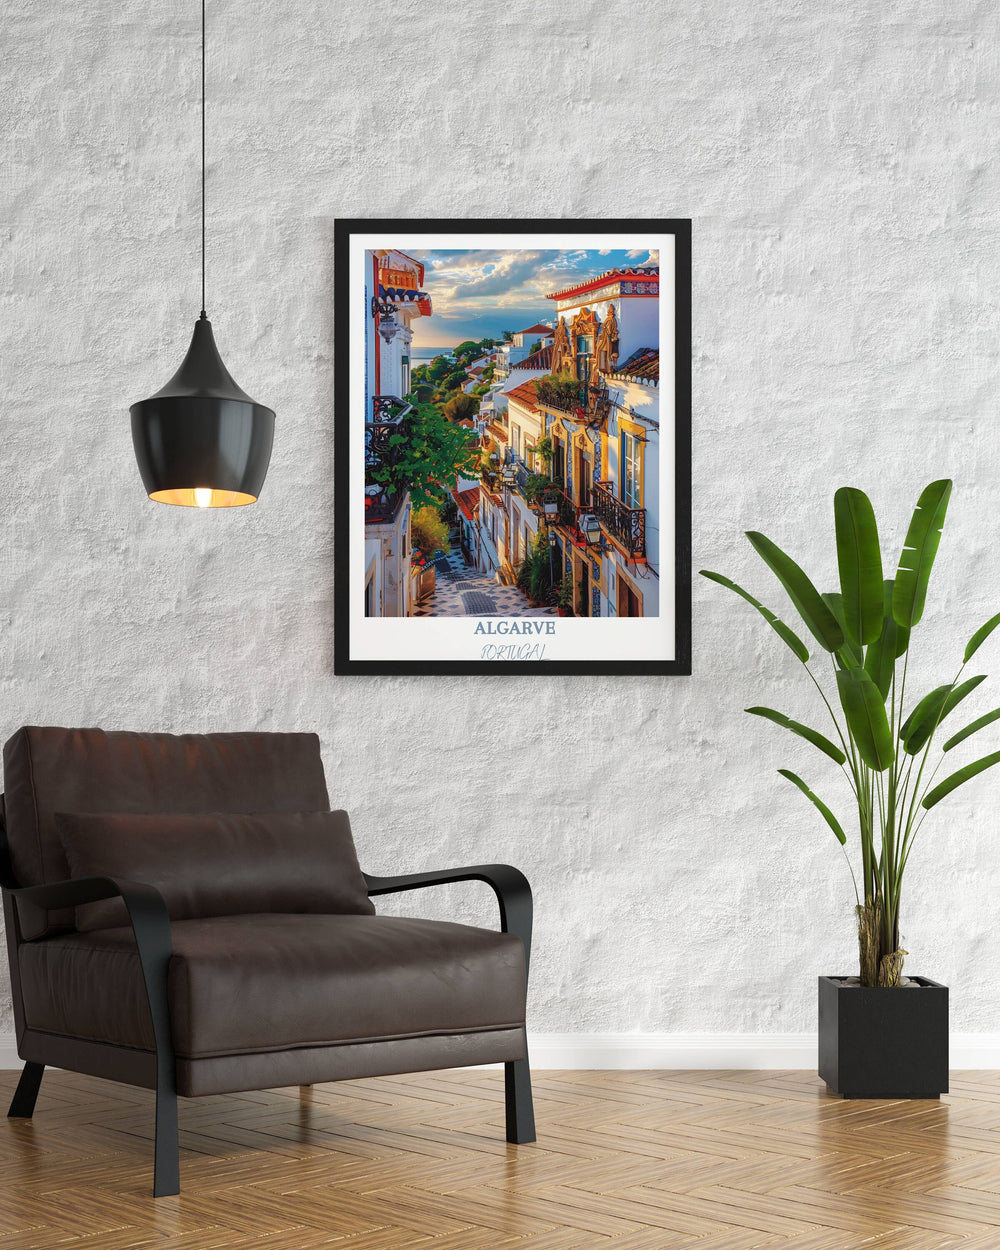 Stunning Algarve art print showcasing the enchanting Faro Old Town and Cathedral of Faro. A picturesque portrayal of Portugals historic charm, perfect for wall decor or gifting.